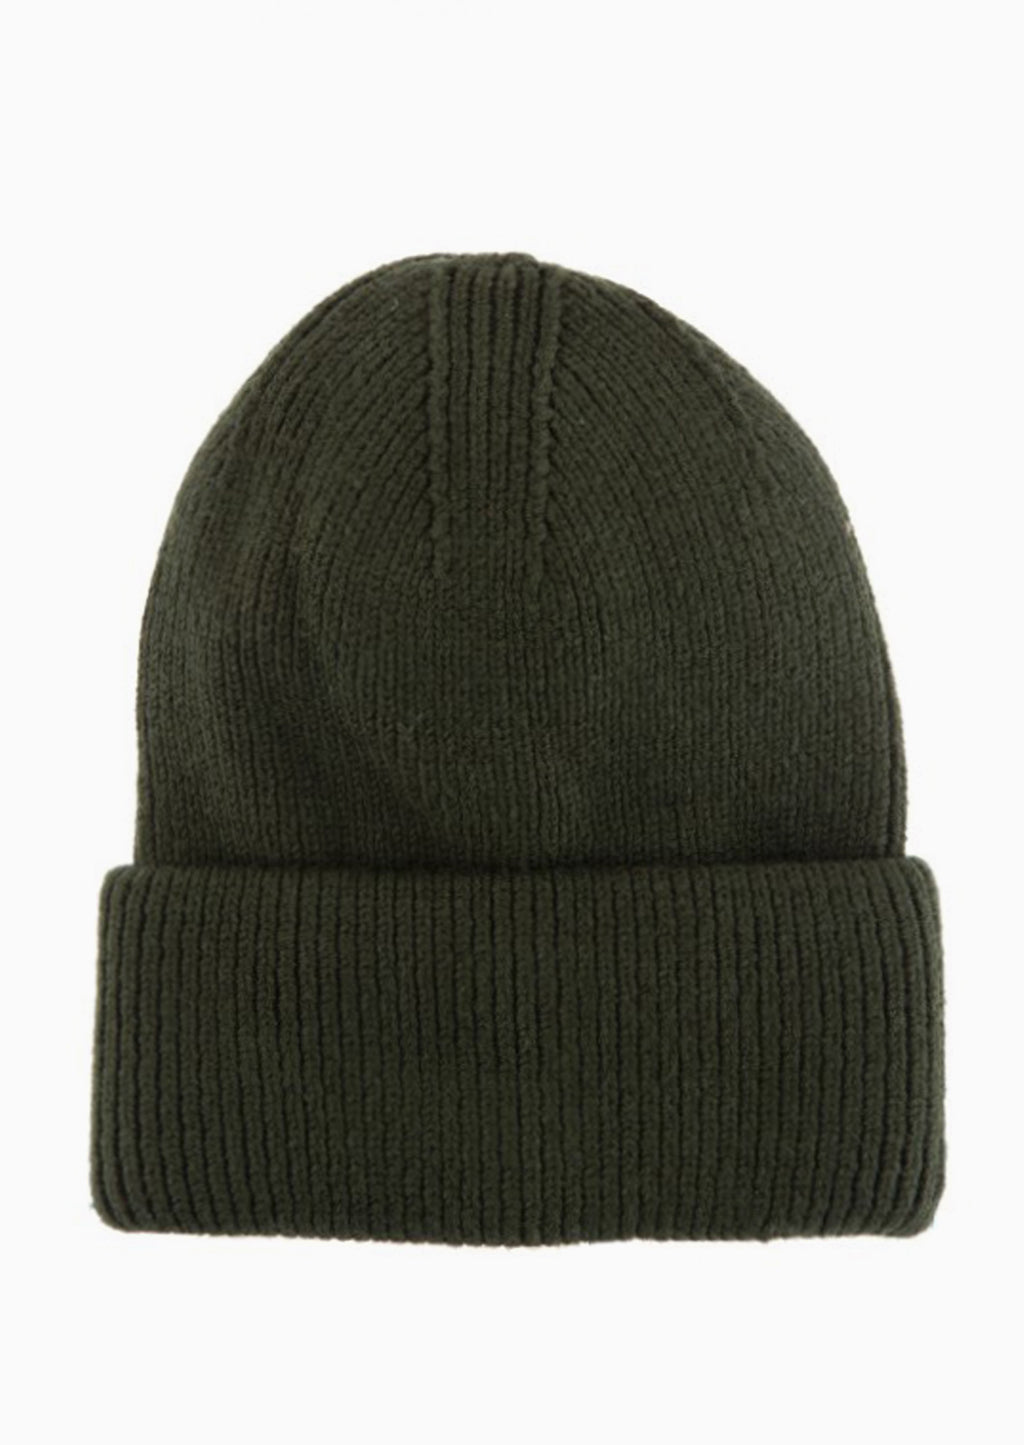 Willow: A knit beanie with oversized cuff in willow green.